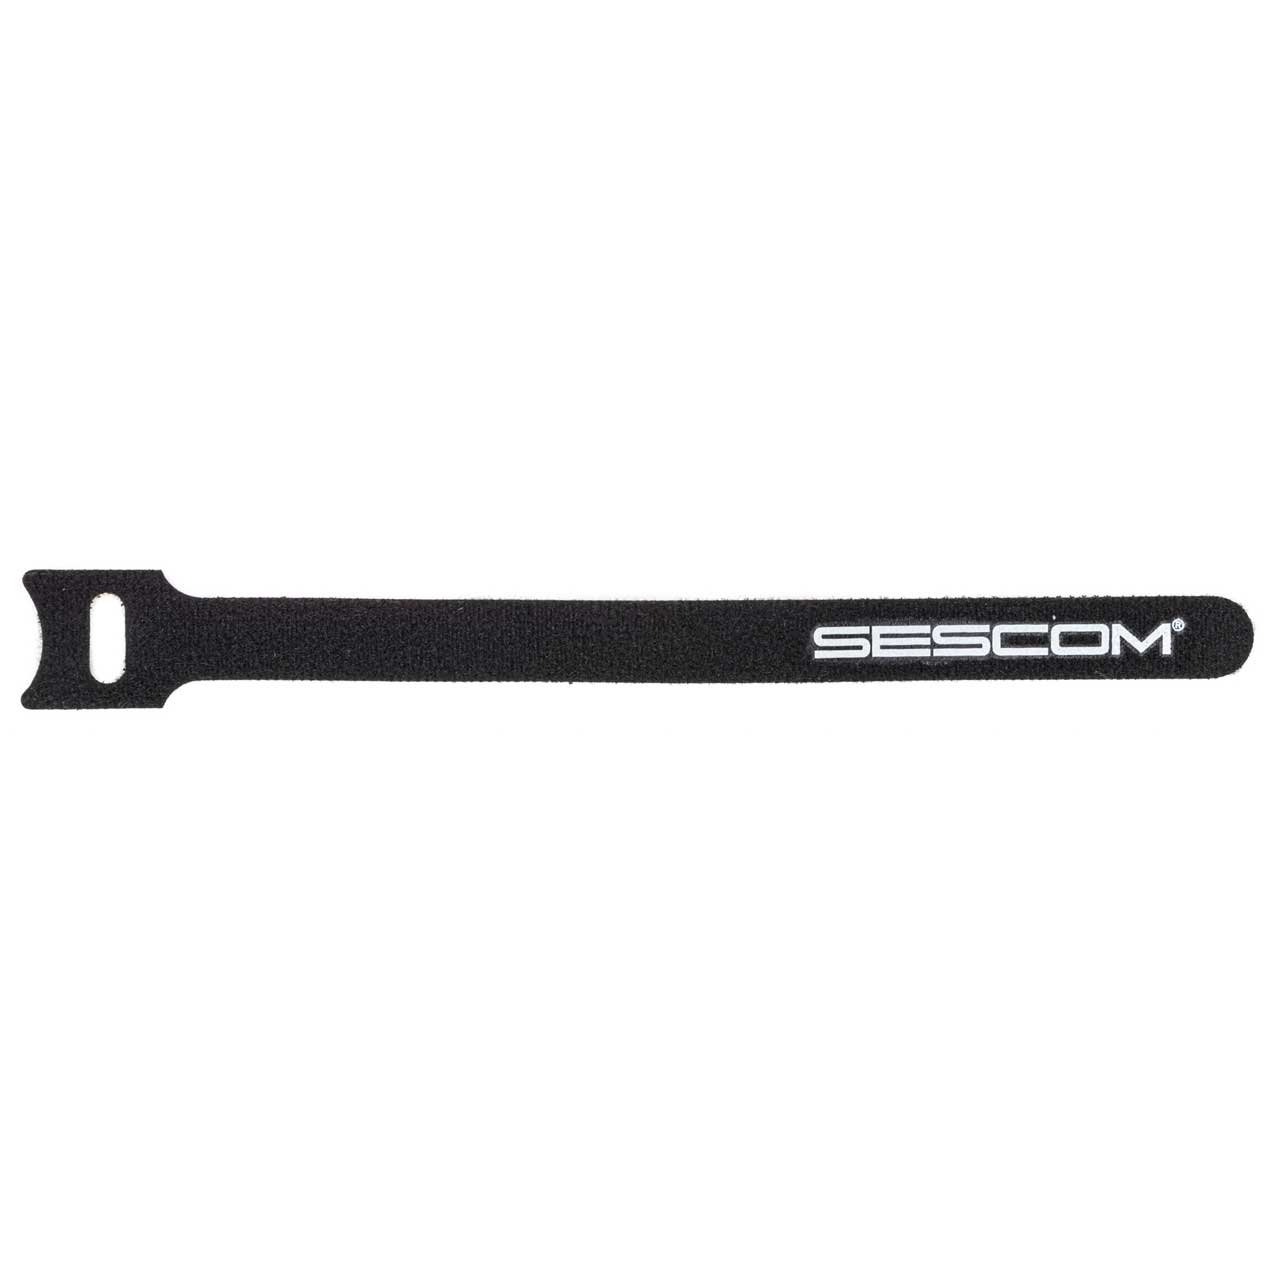 Sescom Hook and Loop Cable Wrap 12mm x 180mm Black with White Logo - 25 Pack SES-HKNLP-25PK